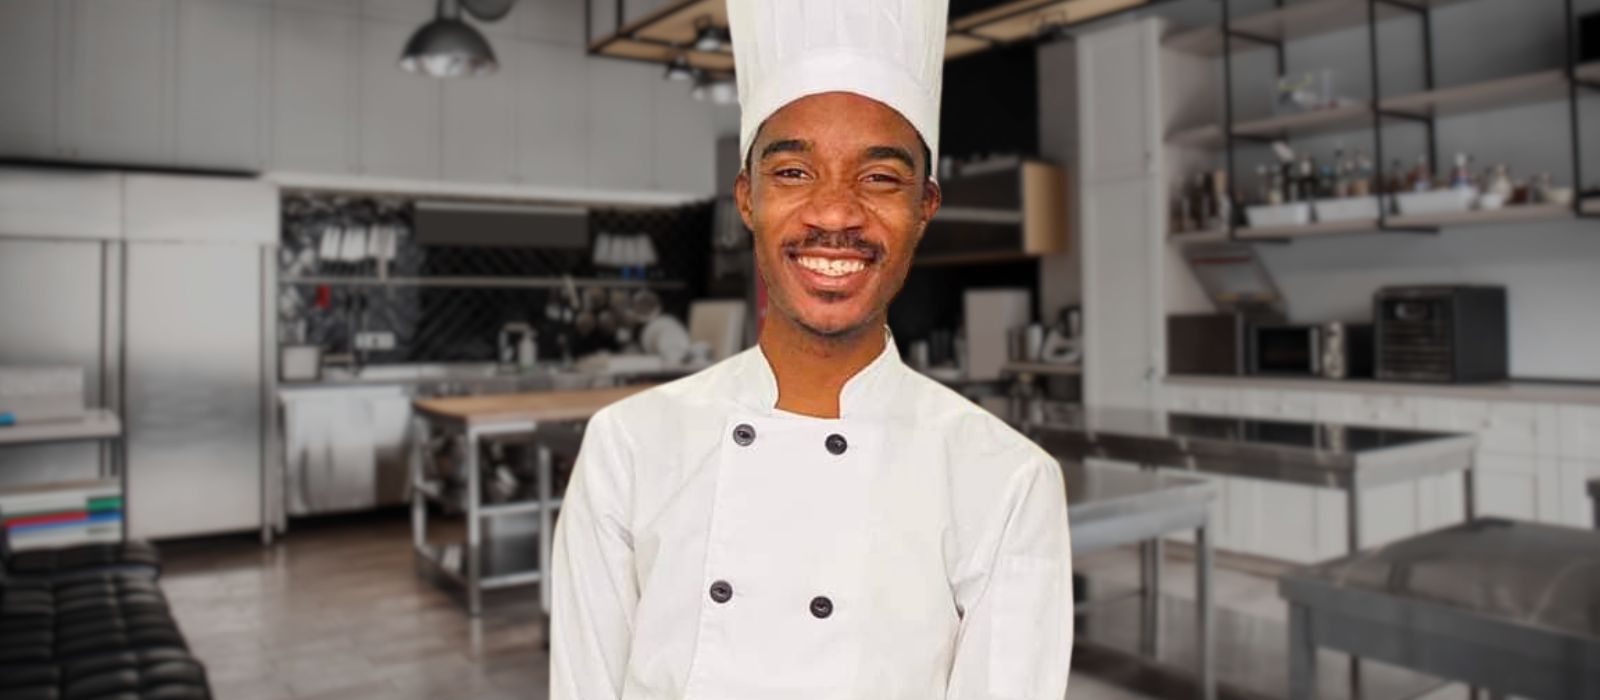 Chef Edwin: ‘Culinary is very broad, you will all find your way and your corner to fit in.’